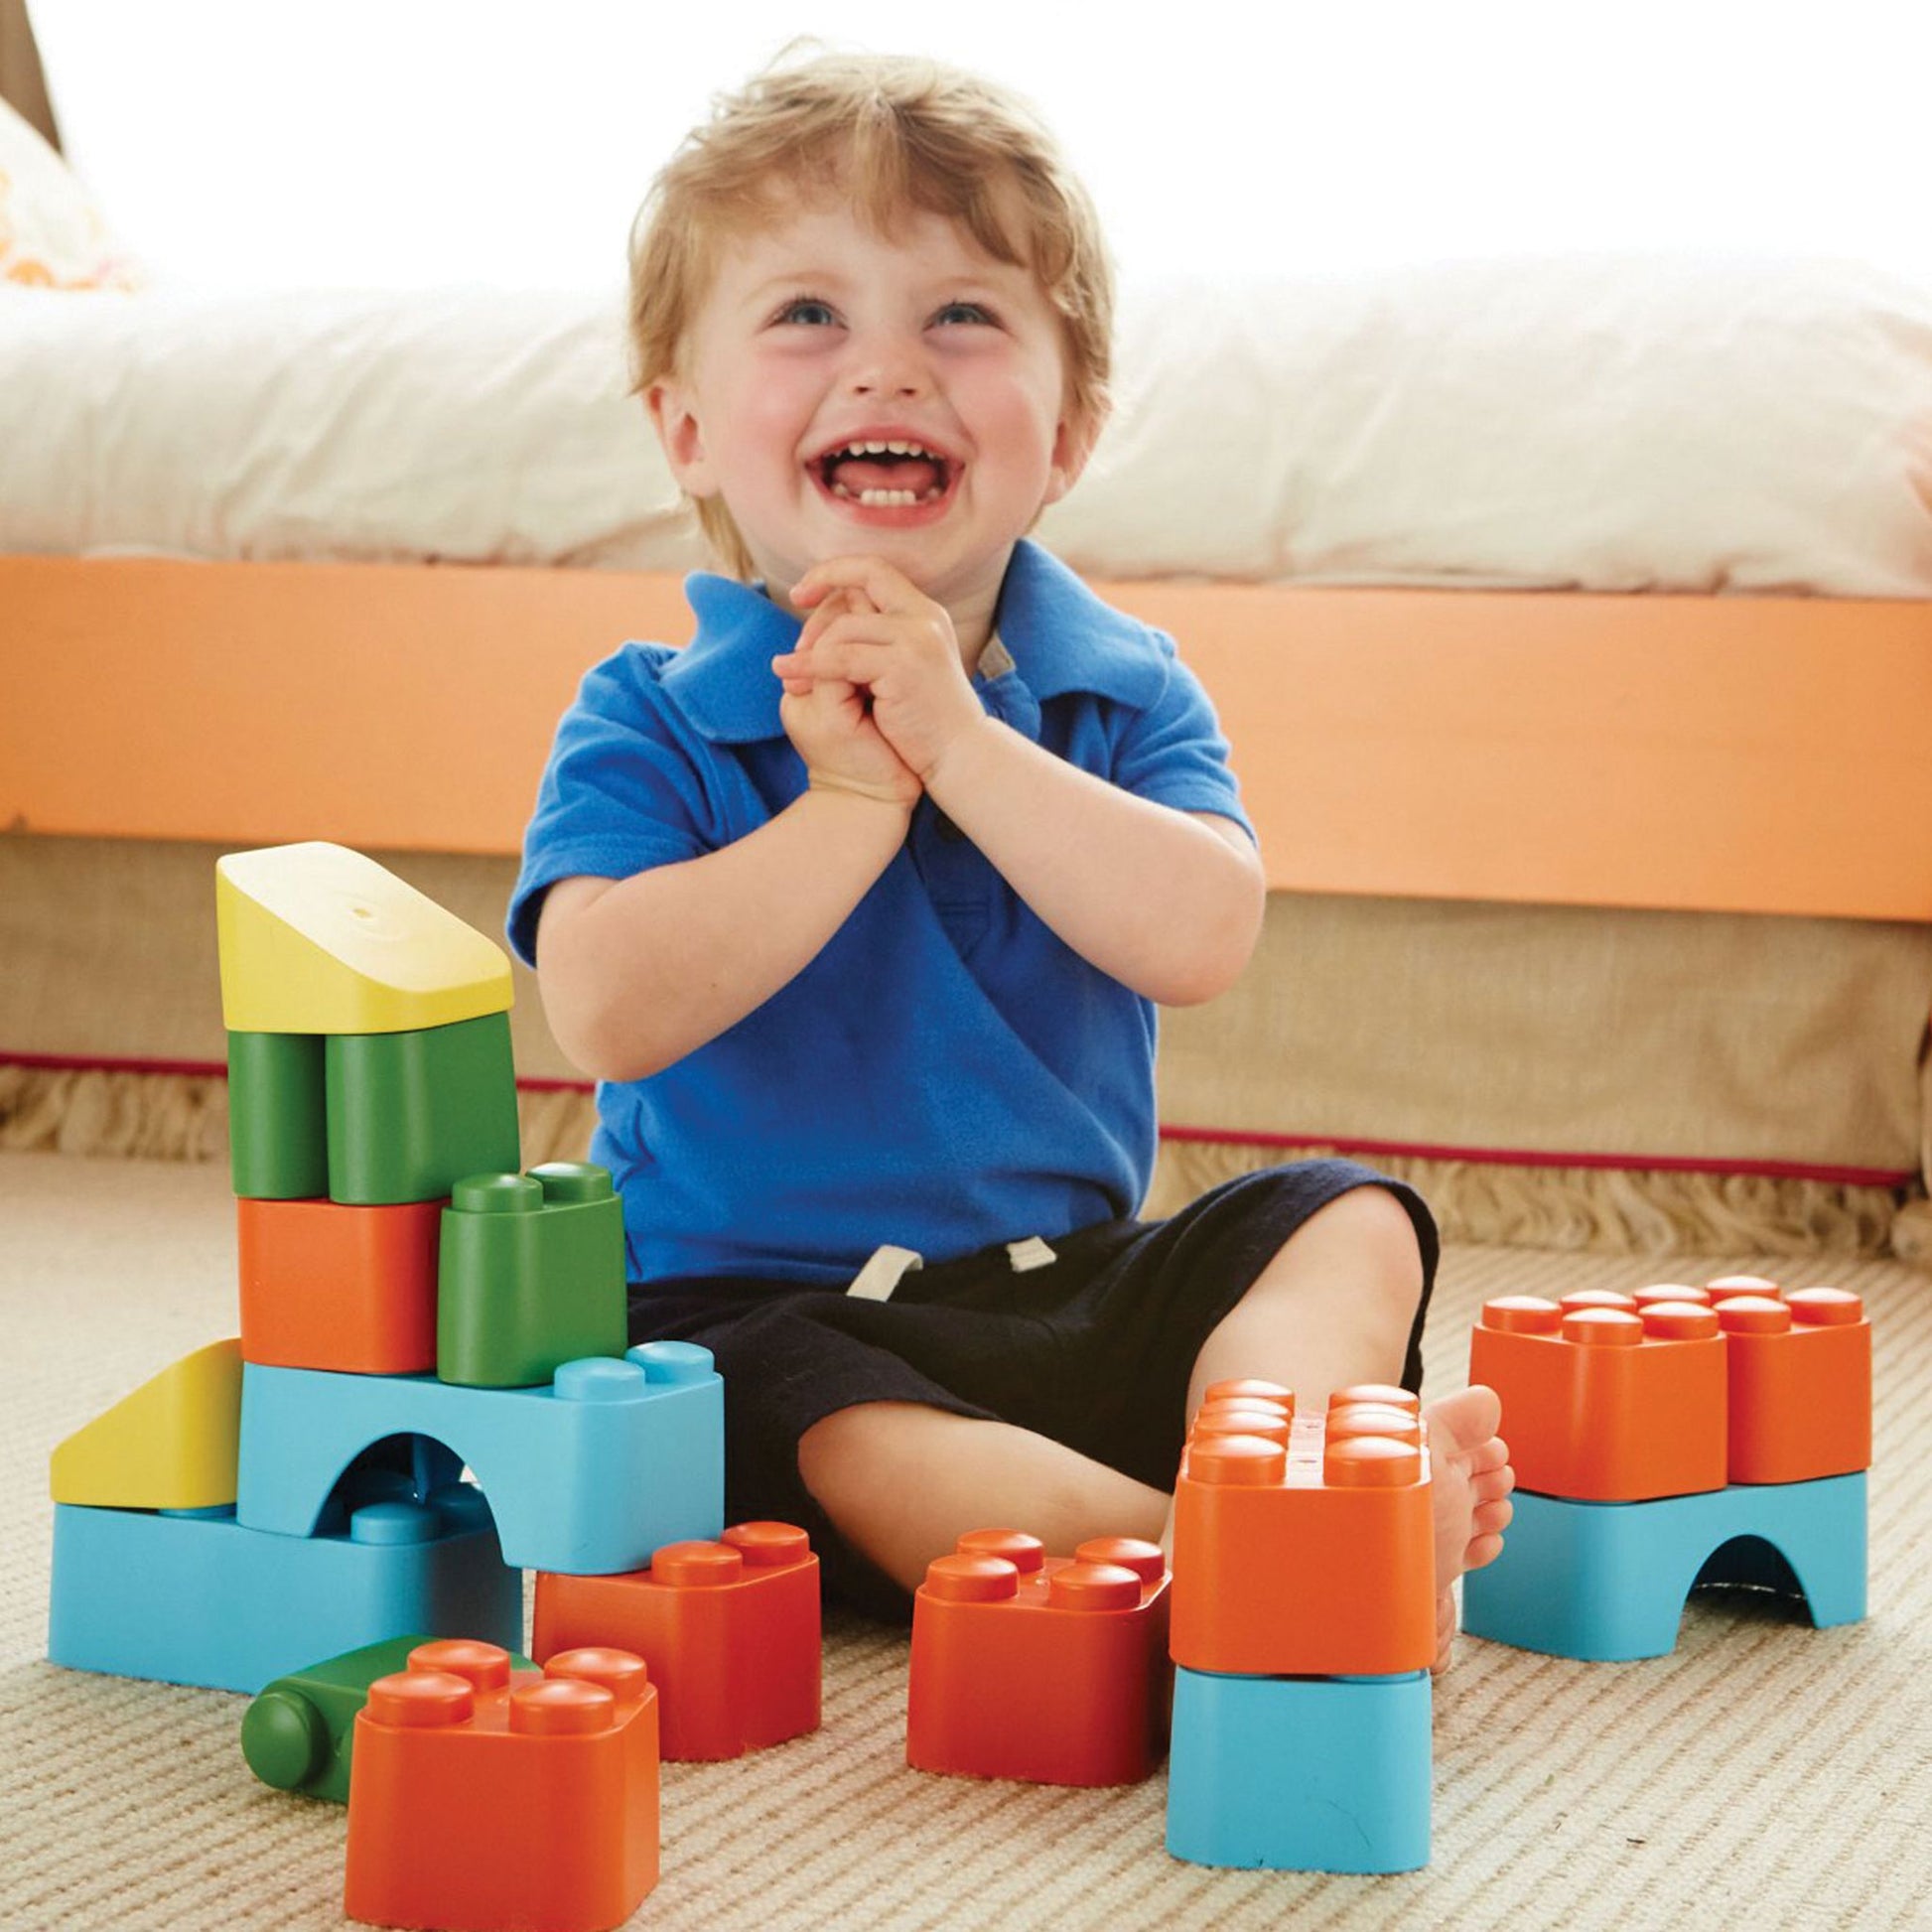 Green Toys Recycled Plastic Blocks - child playing with stacking blocks